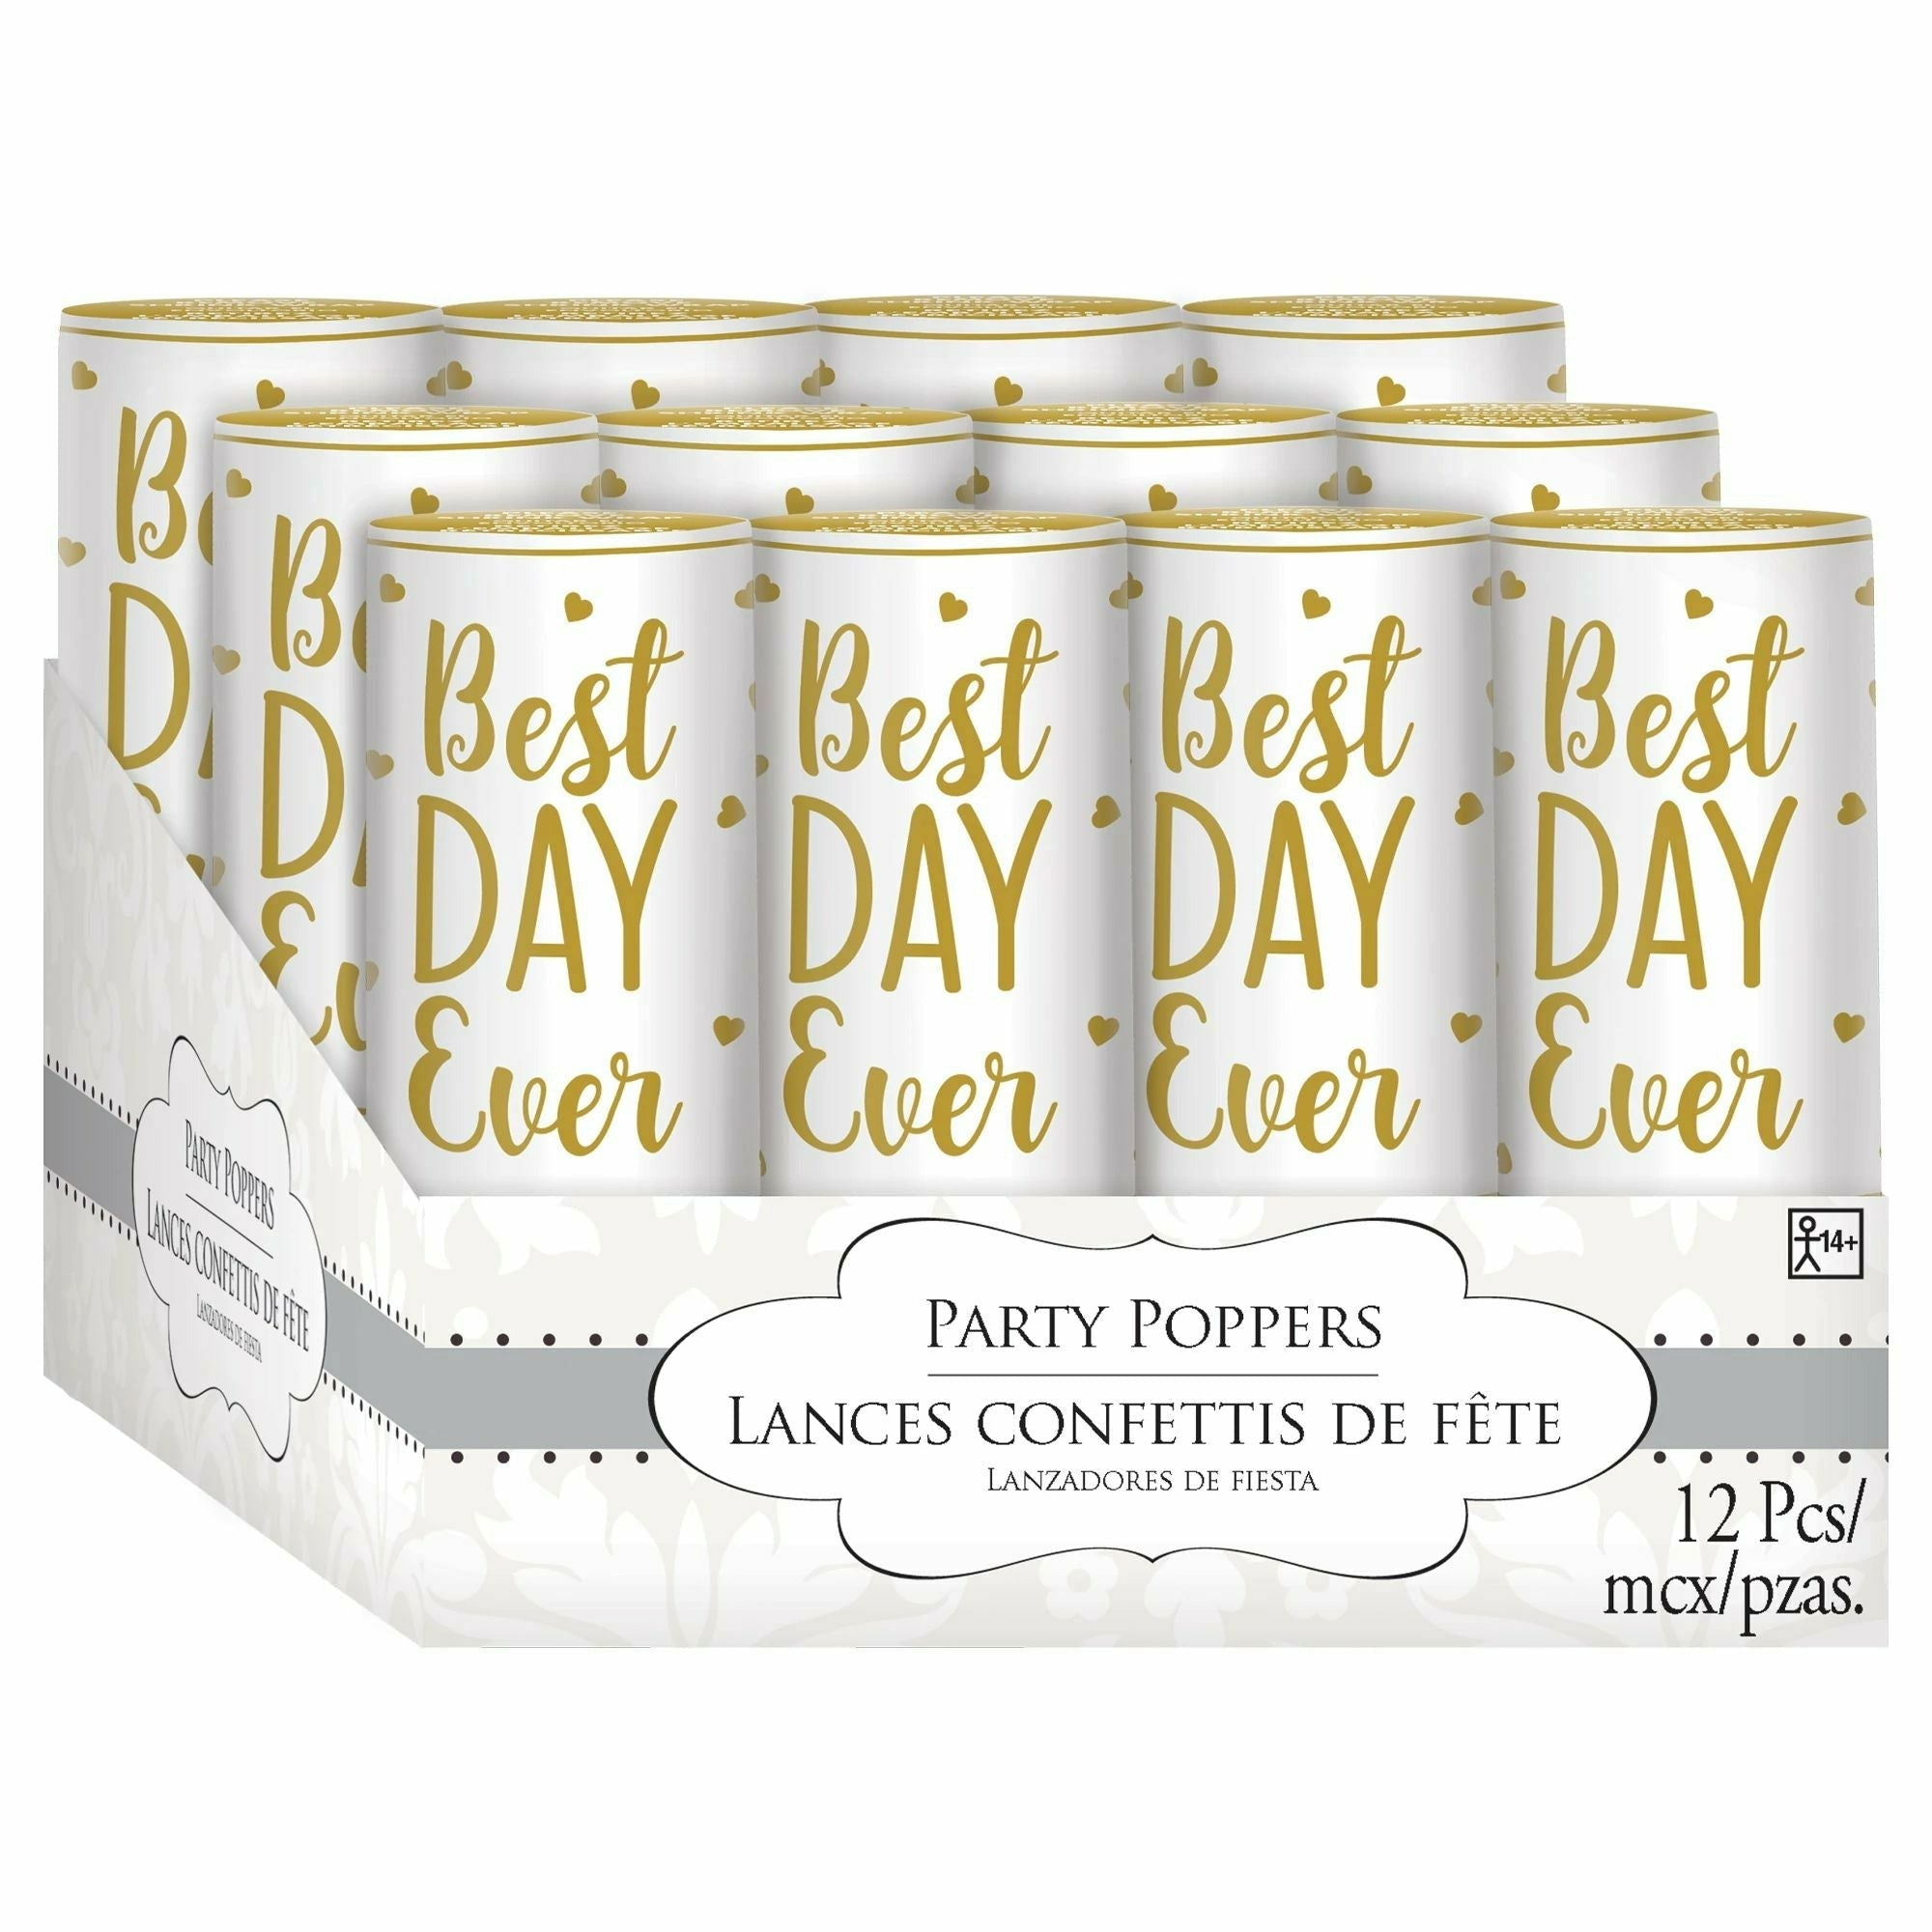 Amscan WEDDING Best Day Ever Party Poppers